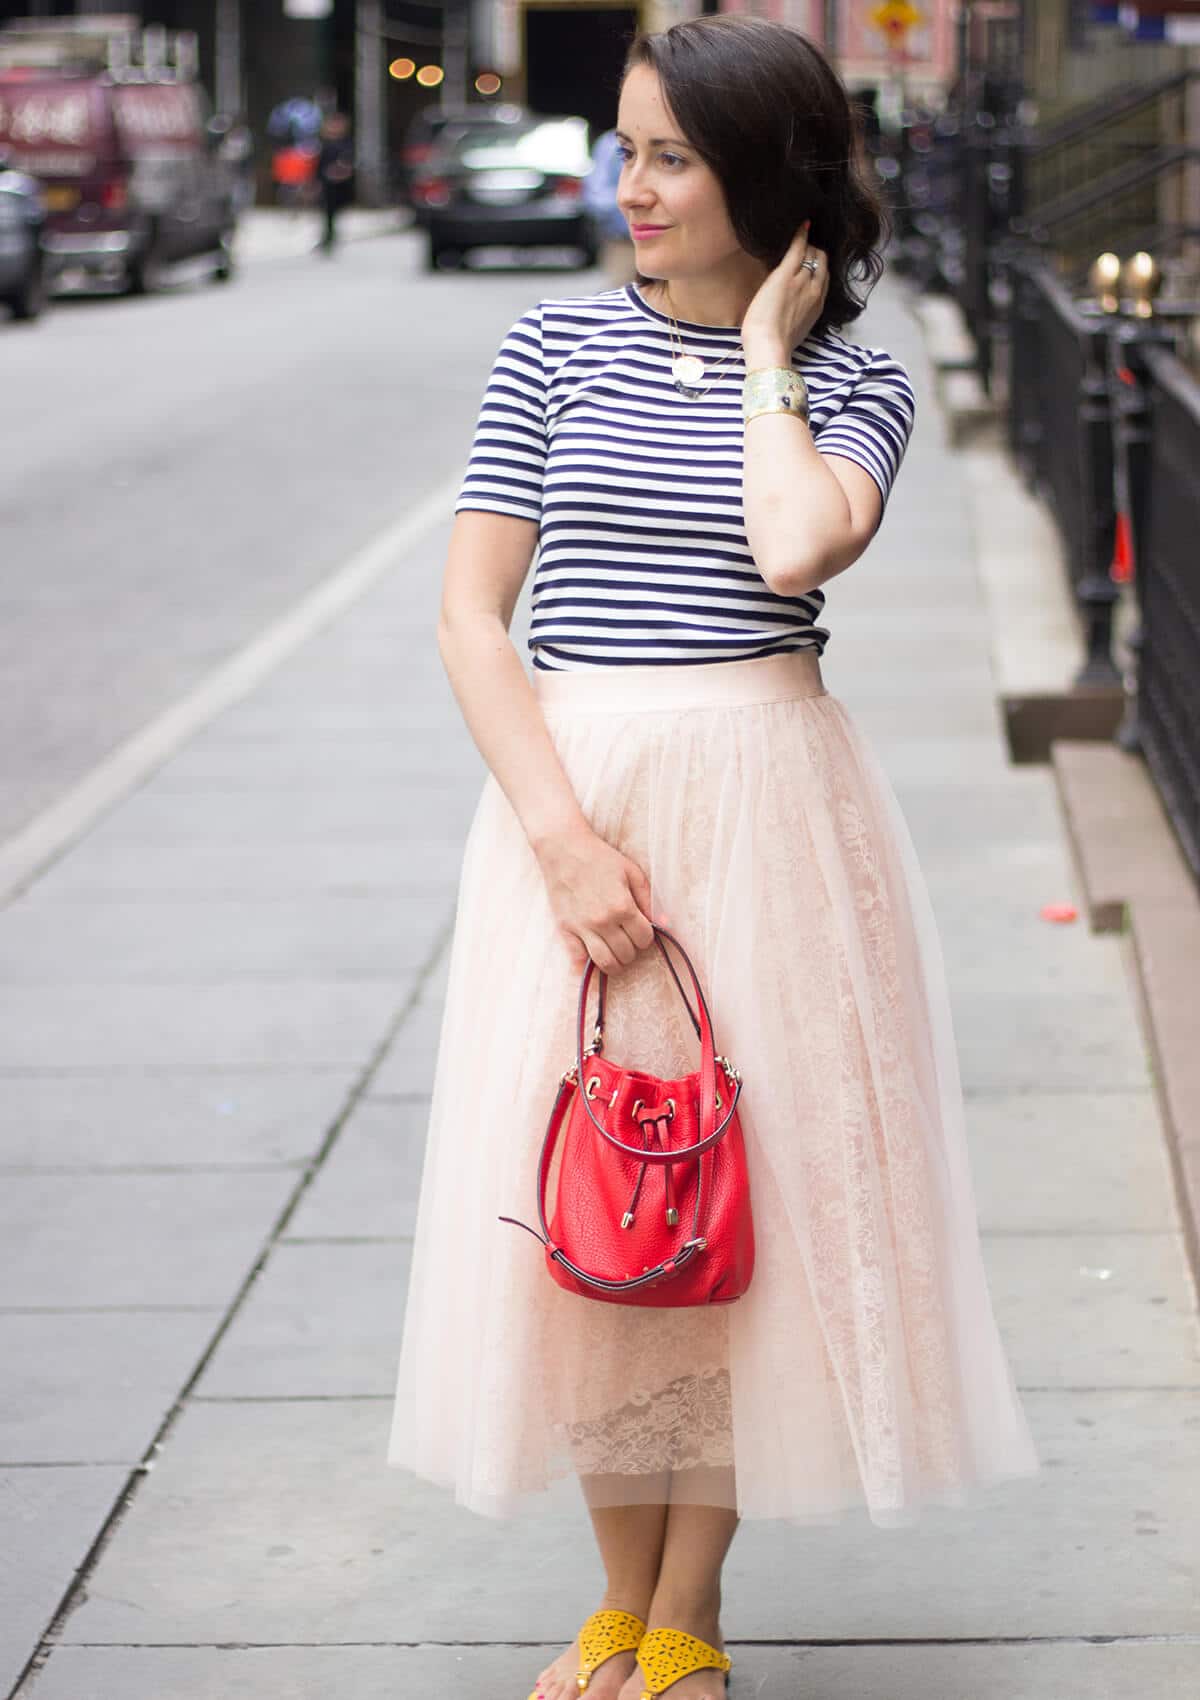 How-to-Style and Wear a Princess Skirt Every Day